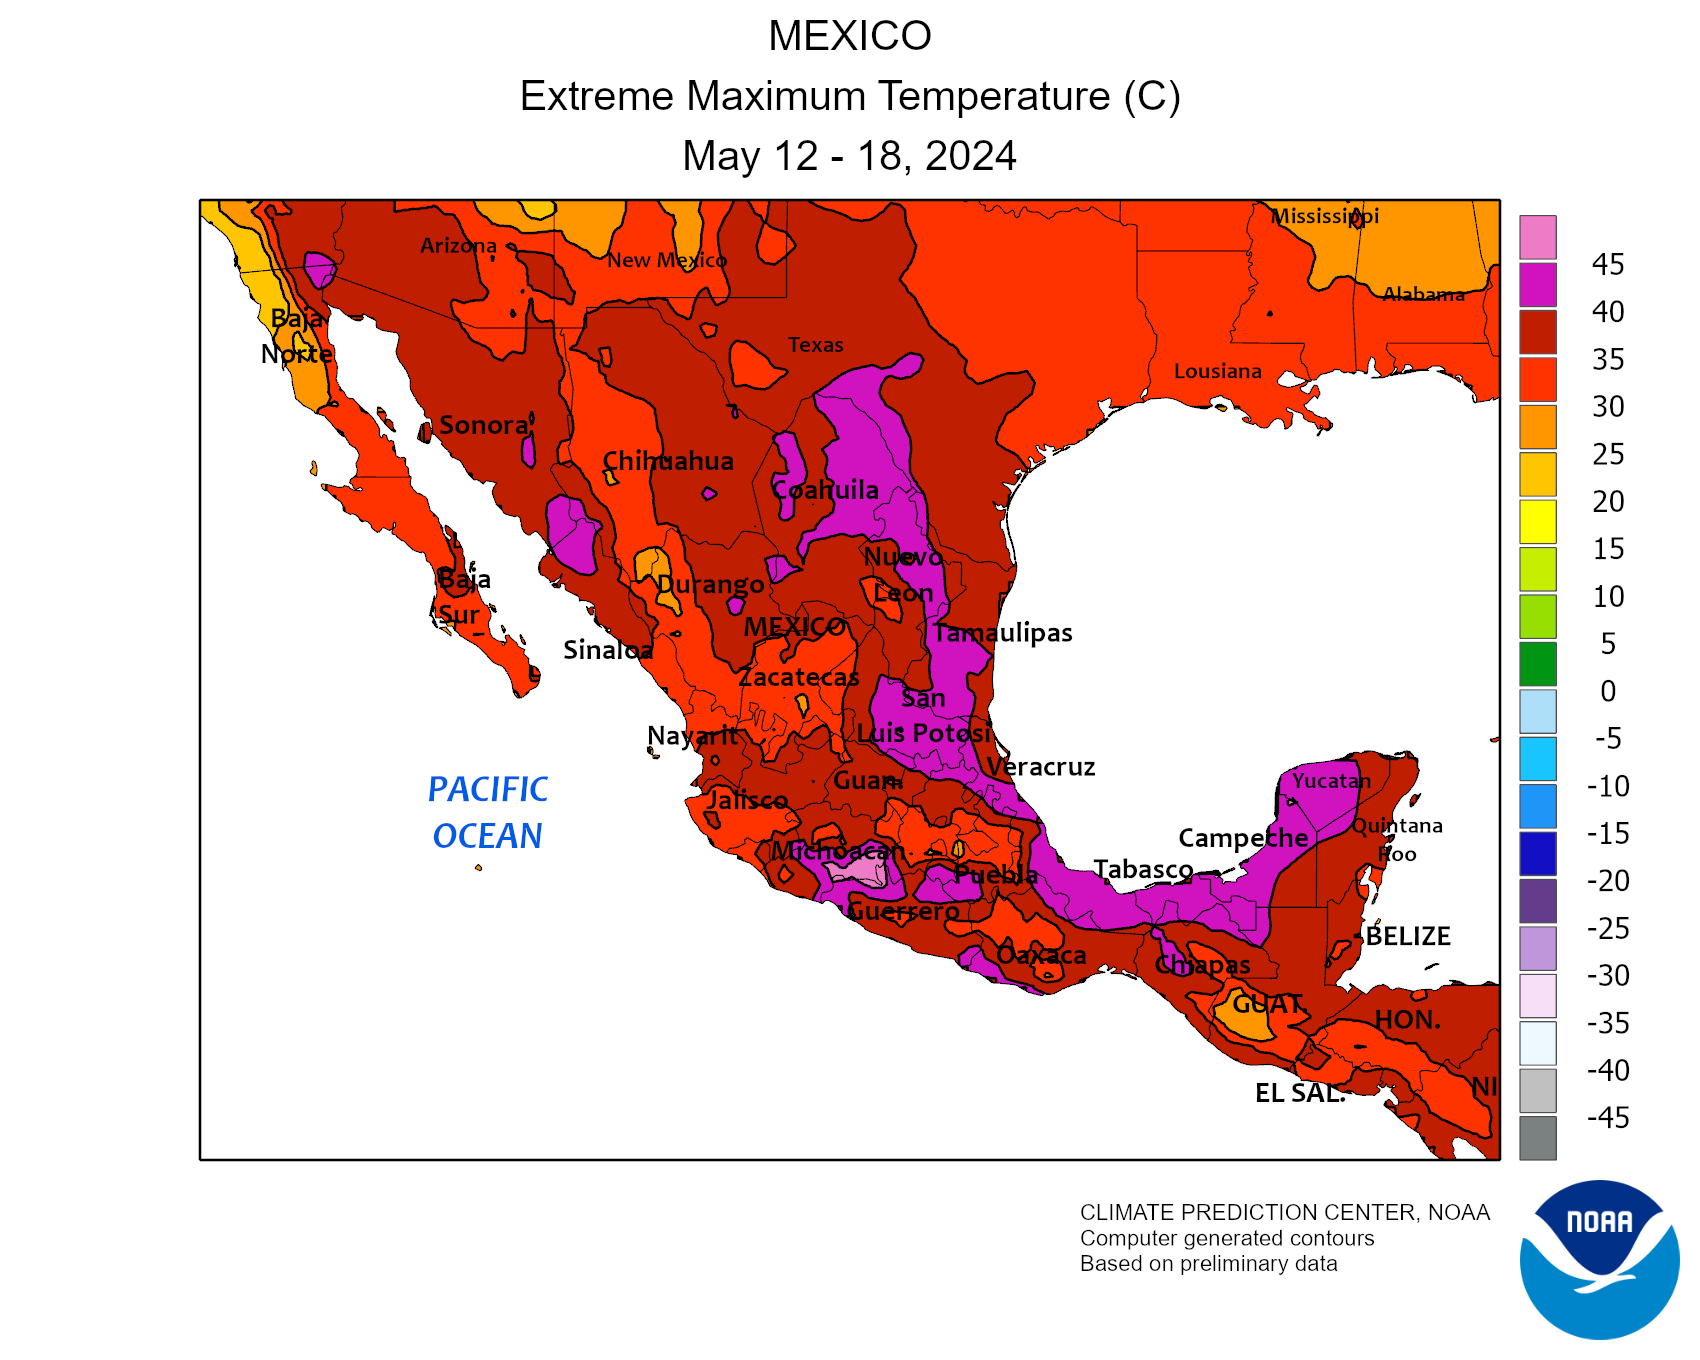 Climate Prediction Center Monitoring and Data Regional Climate Maps